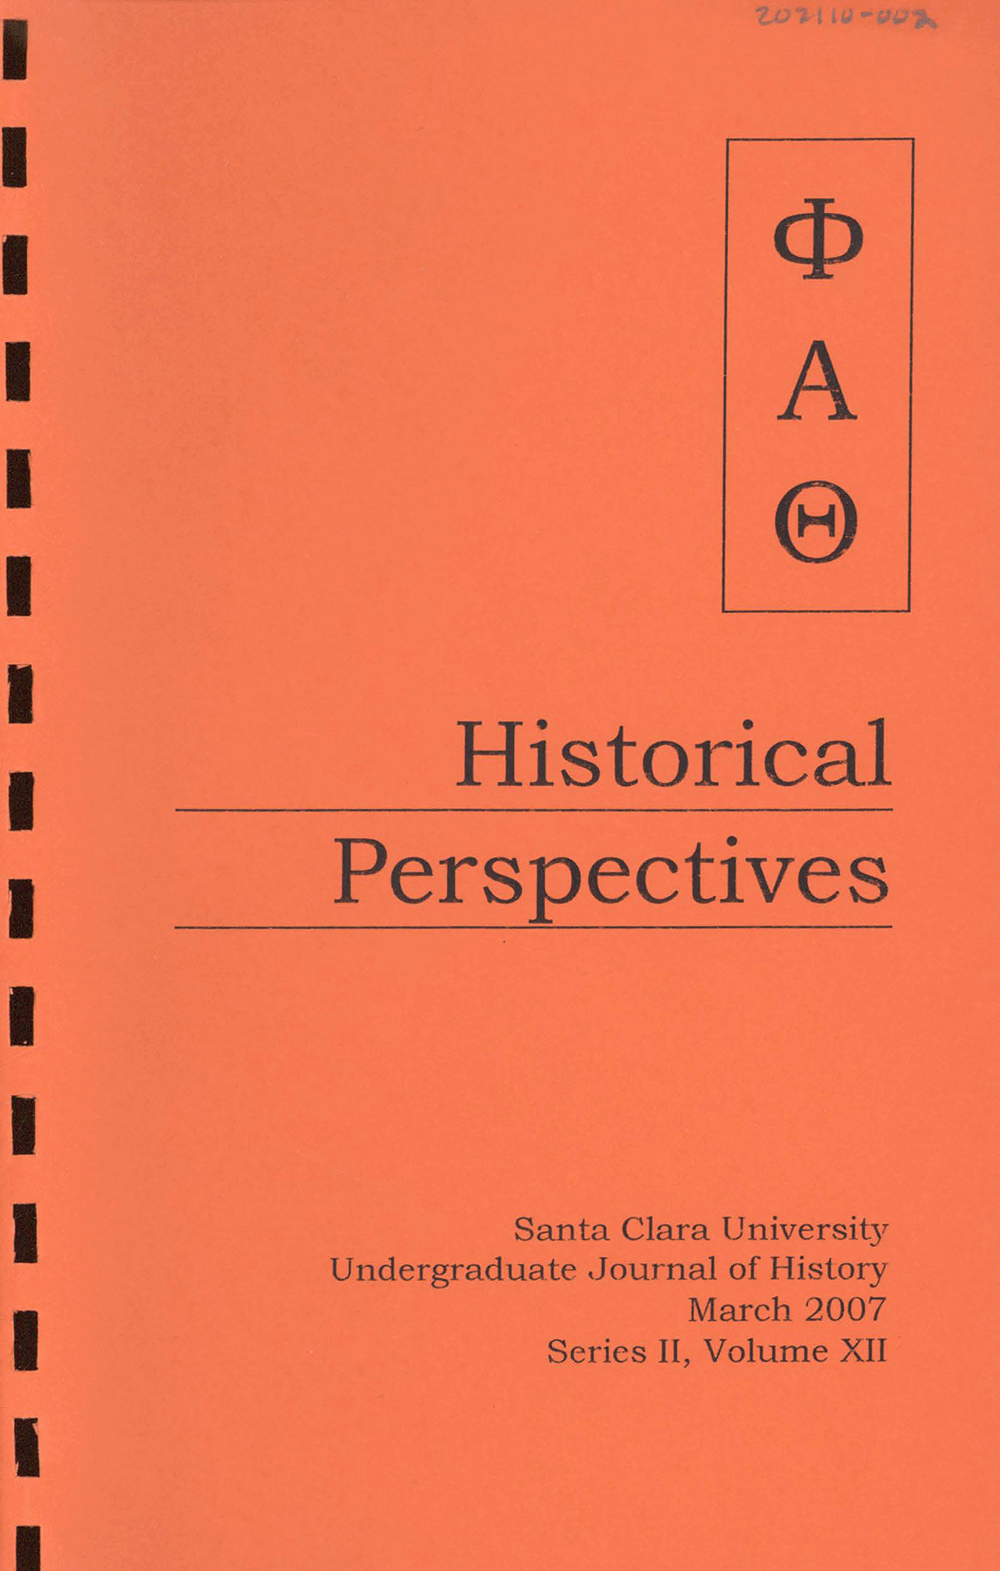 Historical Perspectives 2007, volume 12